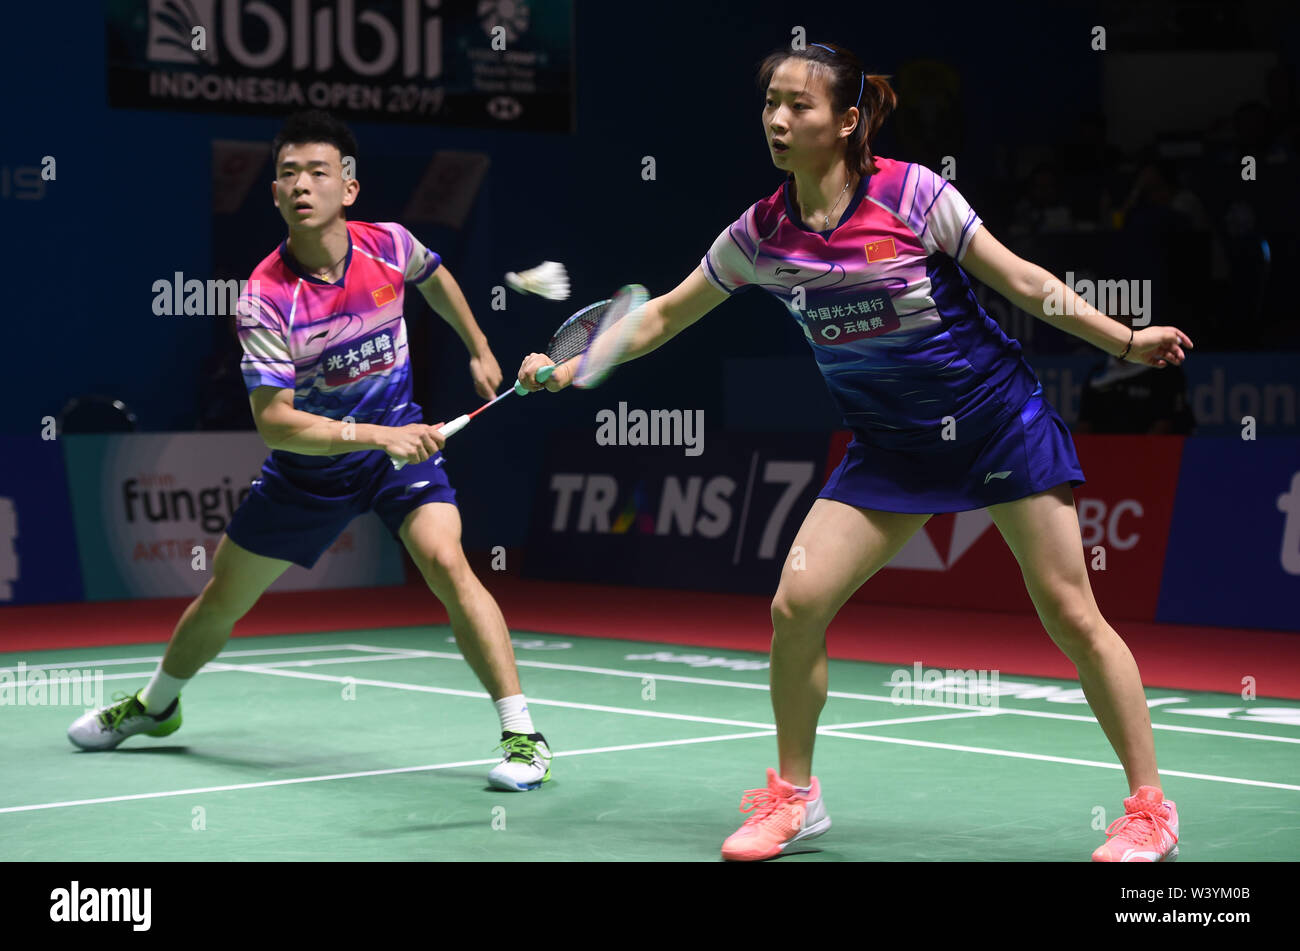 Jakarta, Indonesia. 18th July, 2019. Zheng Siwei (L)/Huang Yaqiong of China  compete during the mixed doubles second round match against Pranaav Jerry  Chopra/Reddy N. Sikki of India at the Blibli Indonesia Open